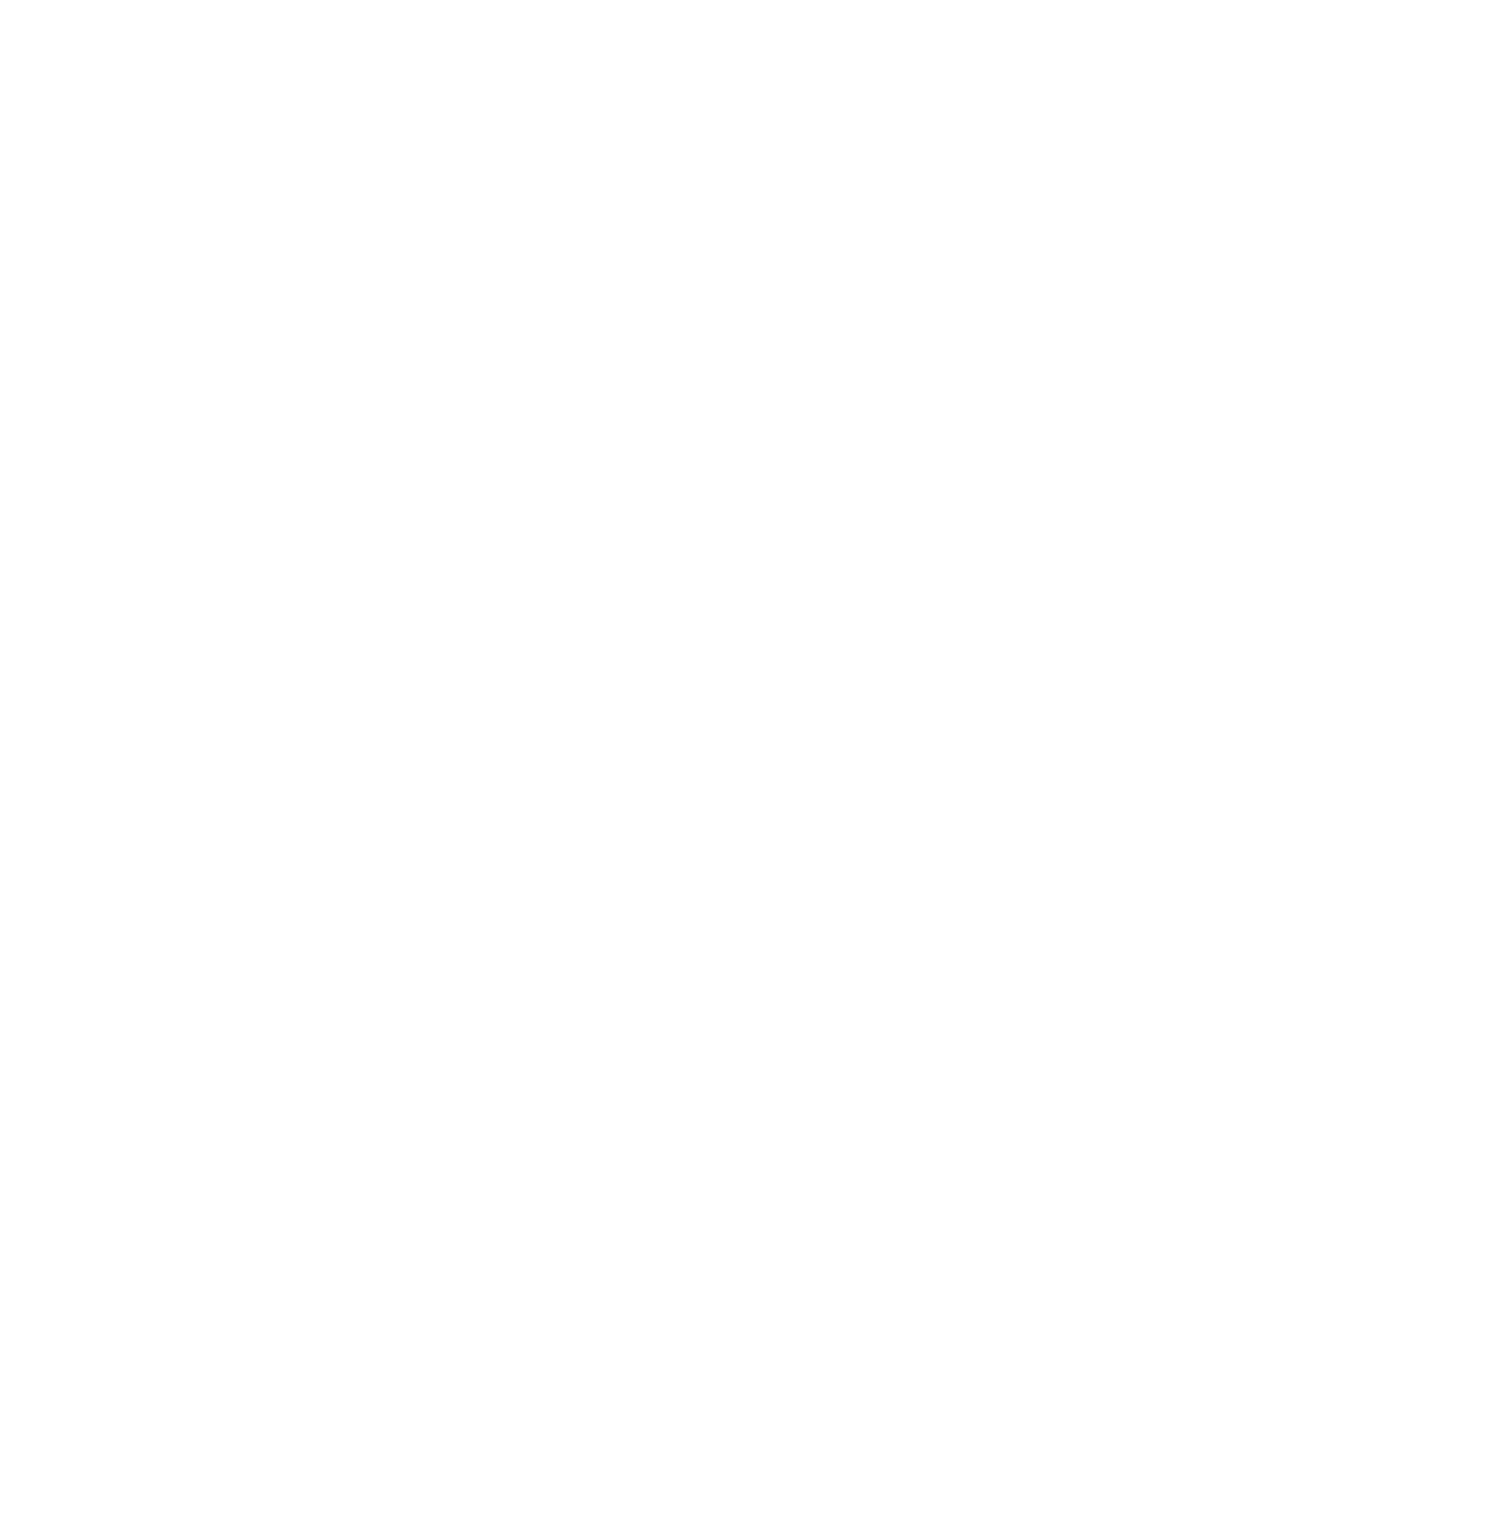 Reese Dunne Photography